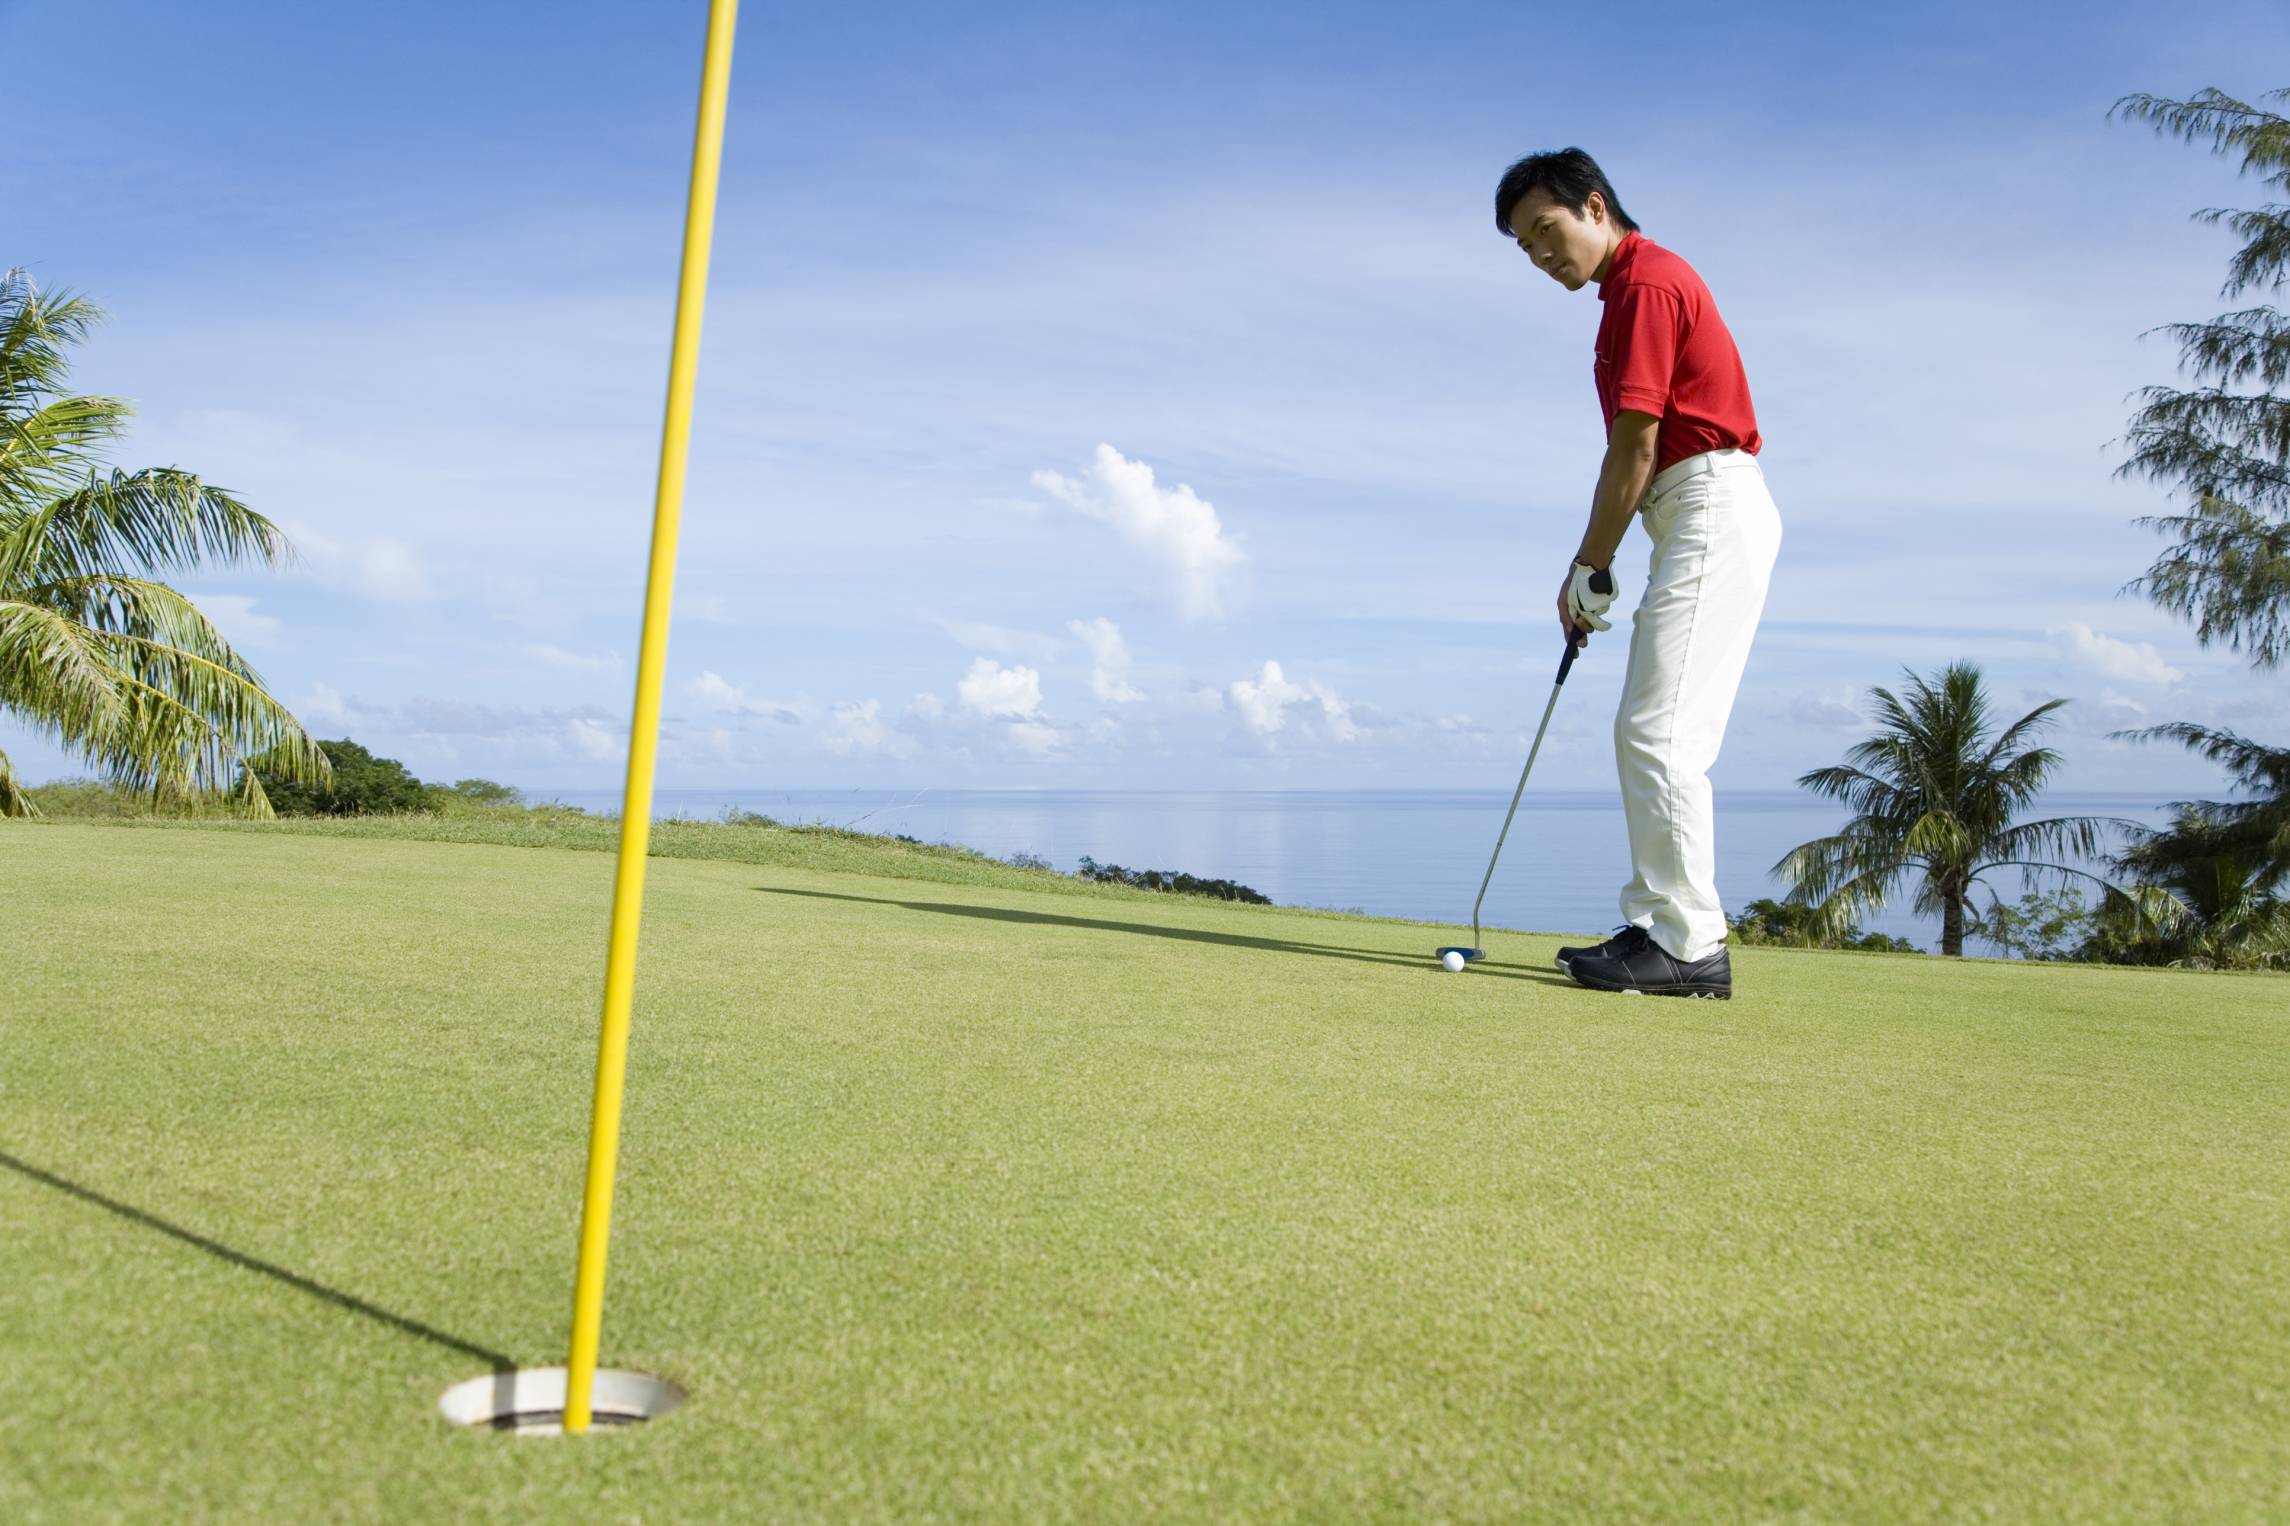 Three Tips to Improve Your Golf Game
